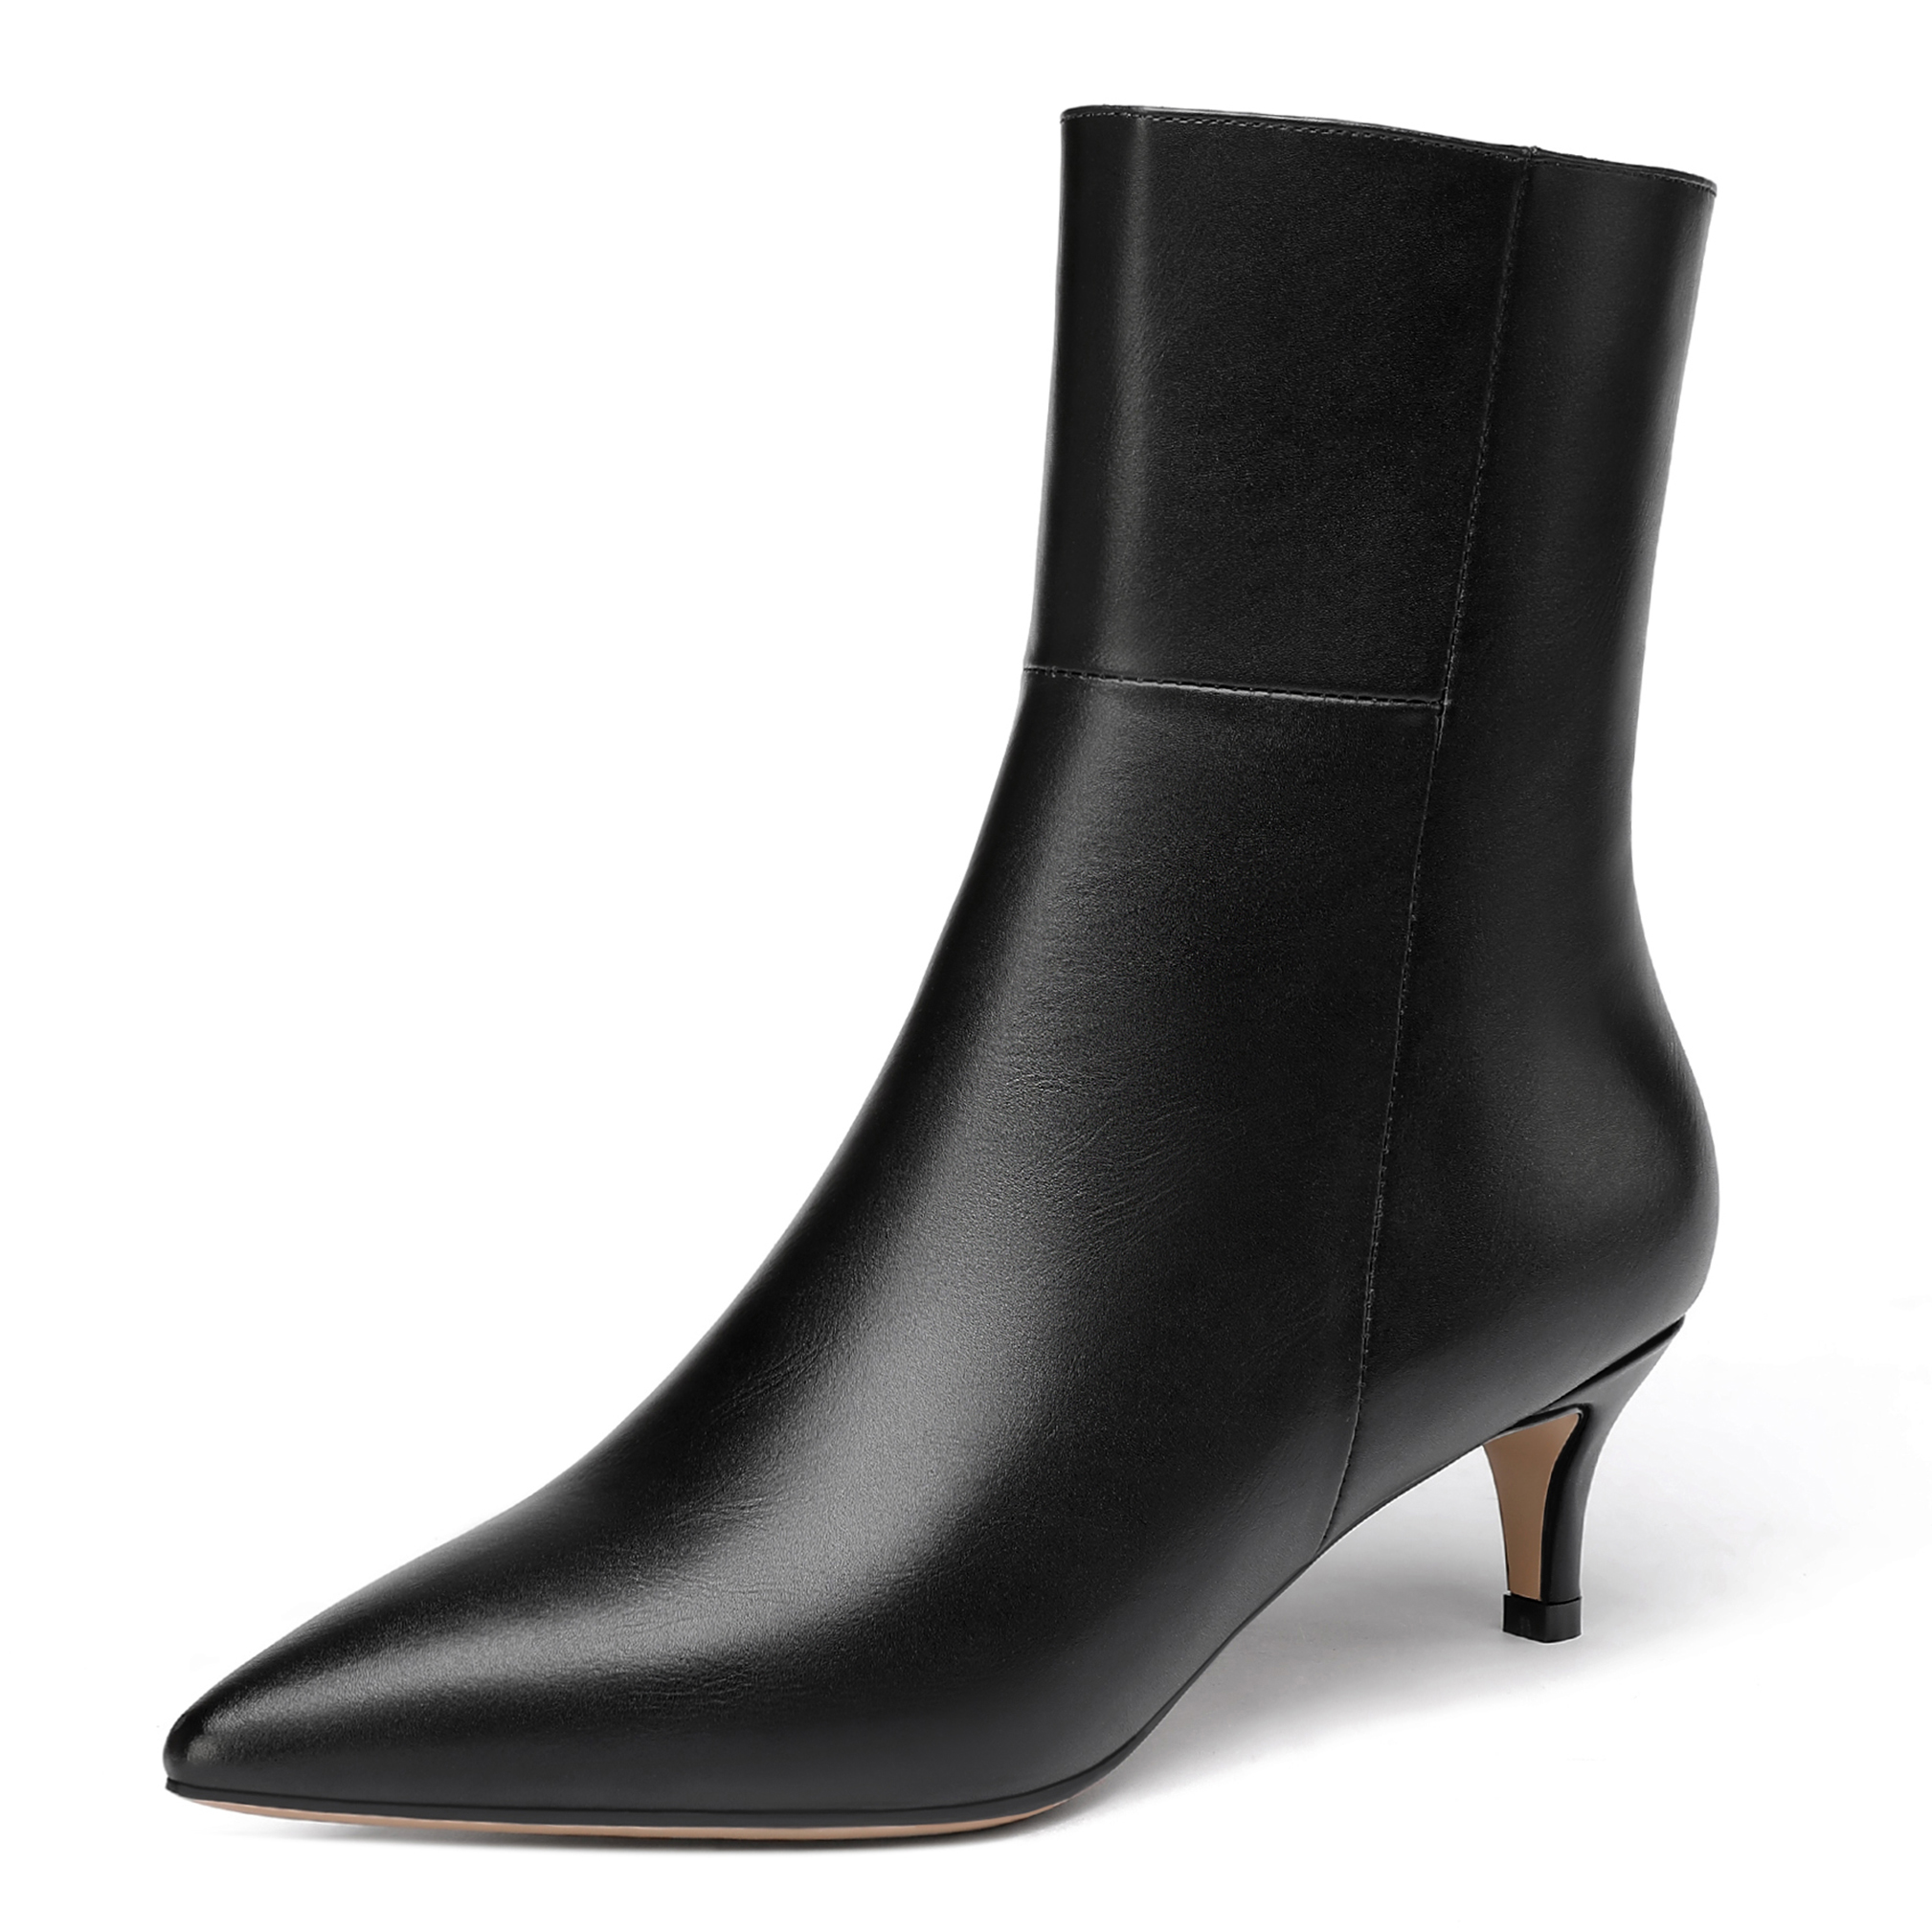 Amyah Matte Pointed Toe Zipper Ankle High Boots